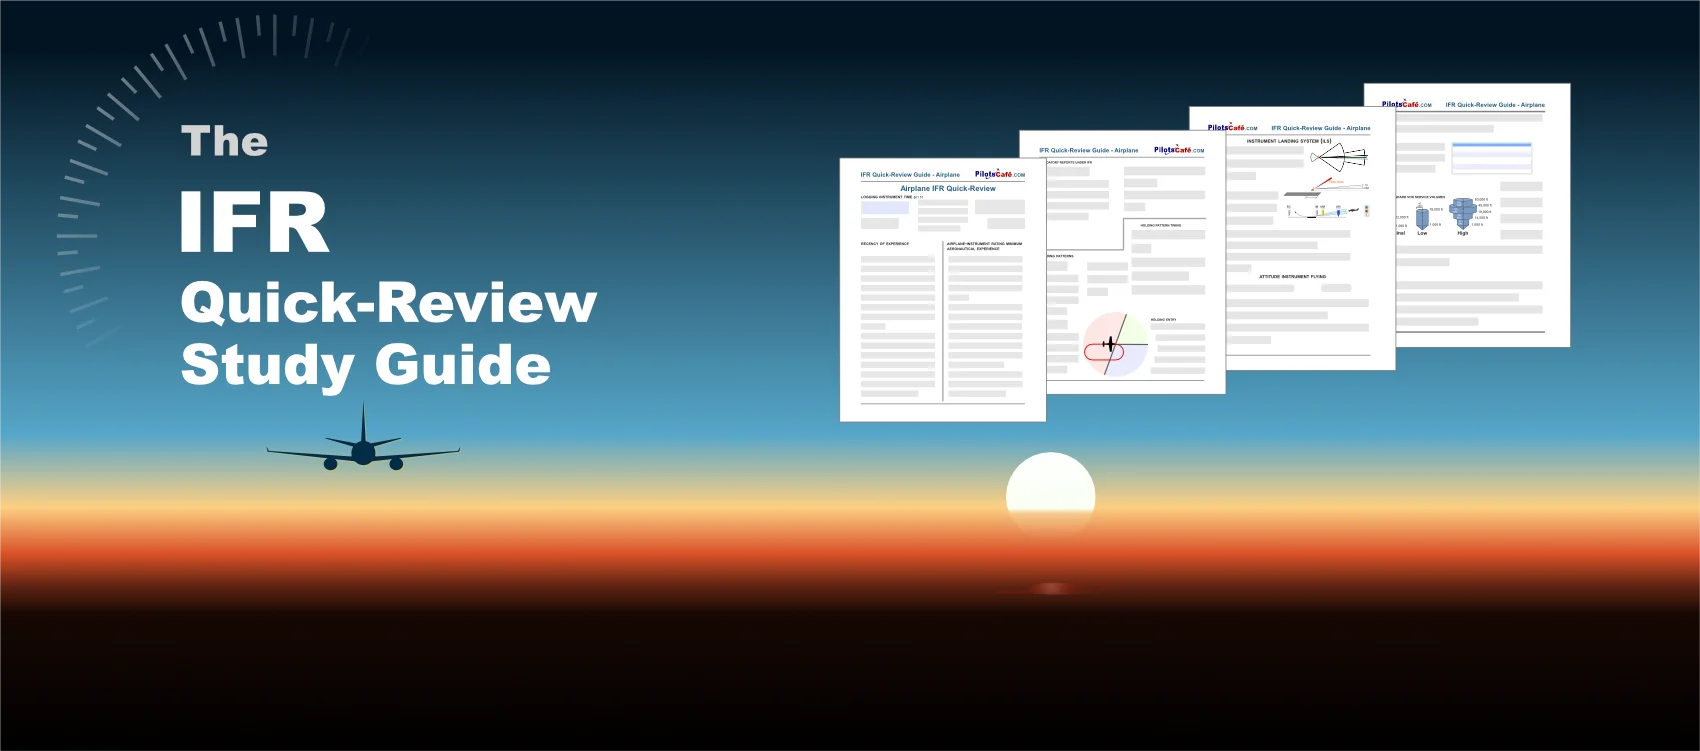 The IFR Quick-Review Study Guide